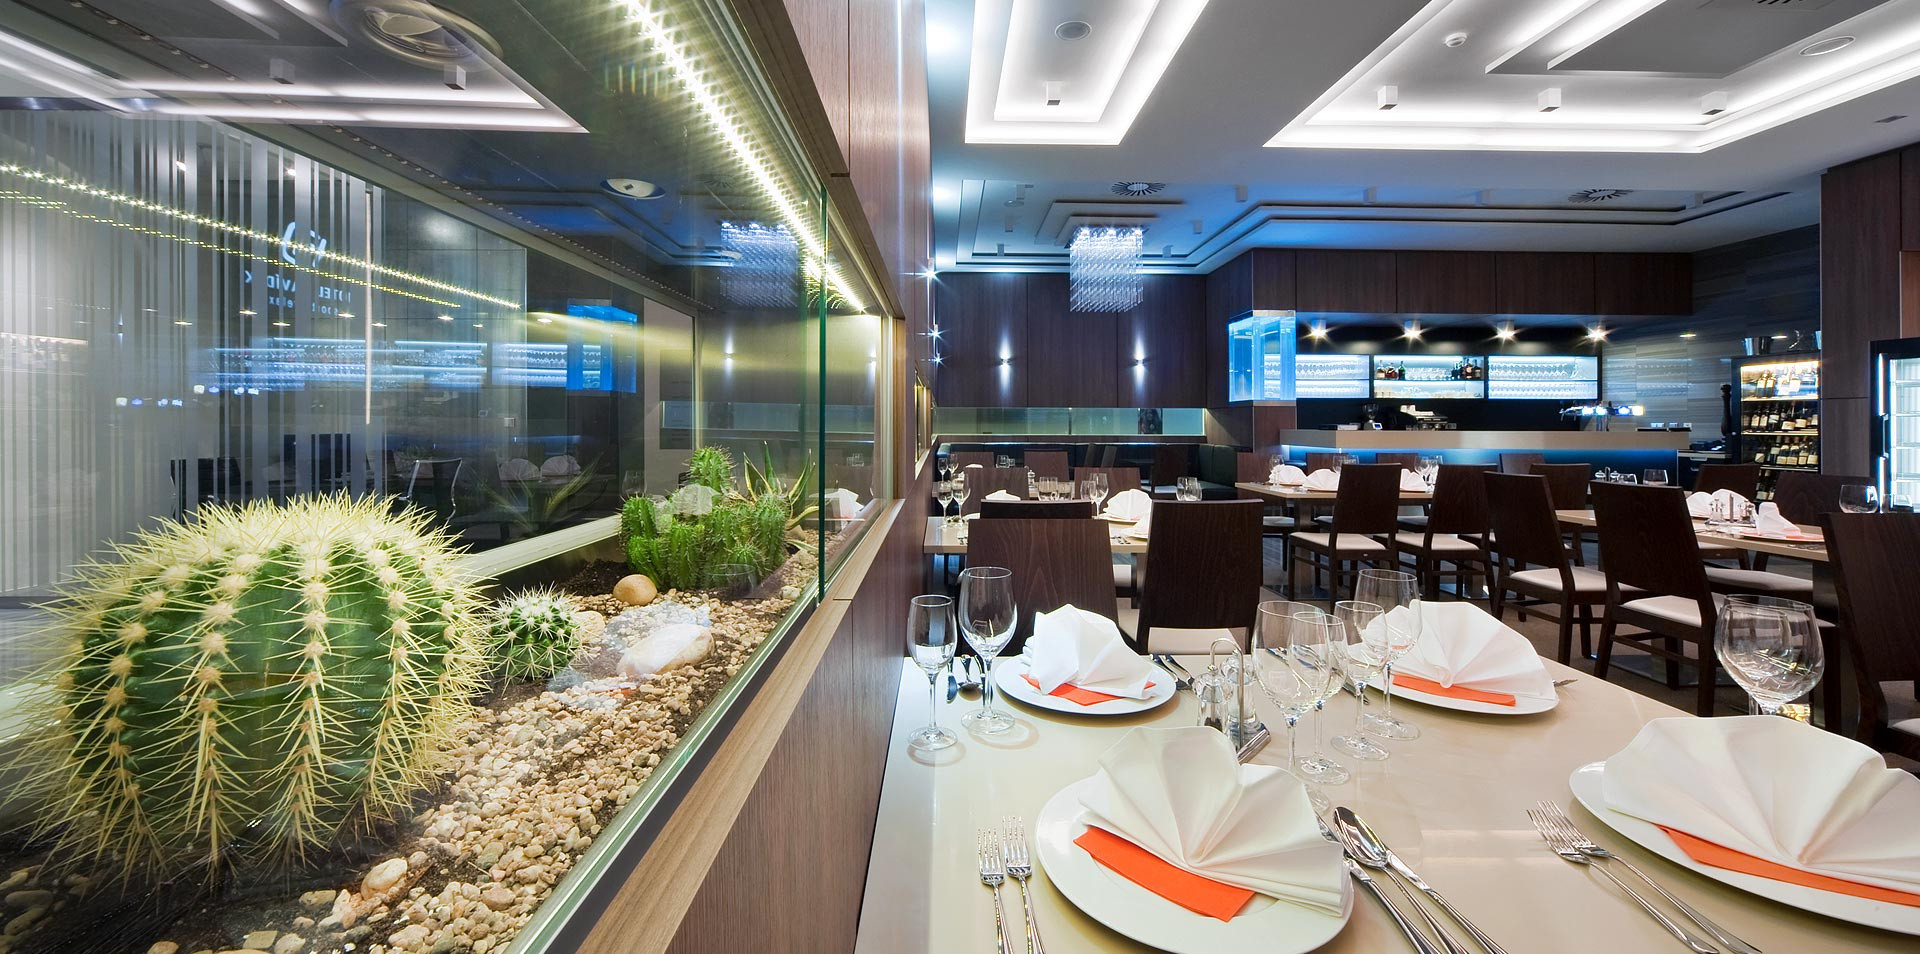 CUBE RESTAURANT|Excellent cuisine and nice service